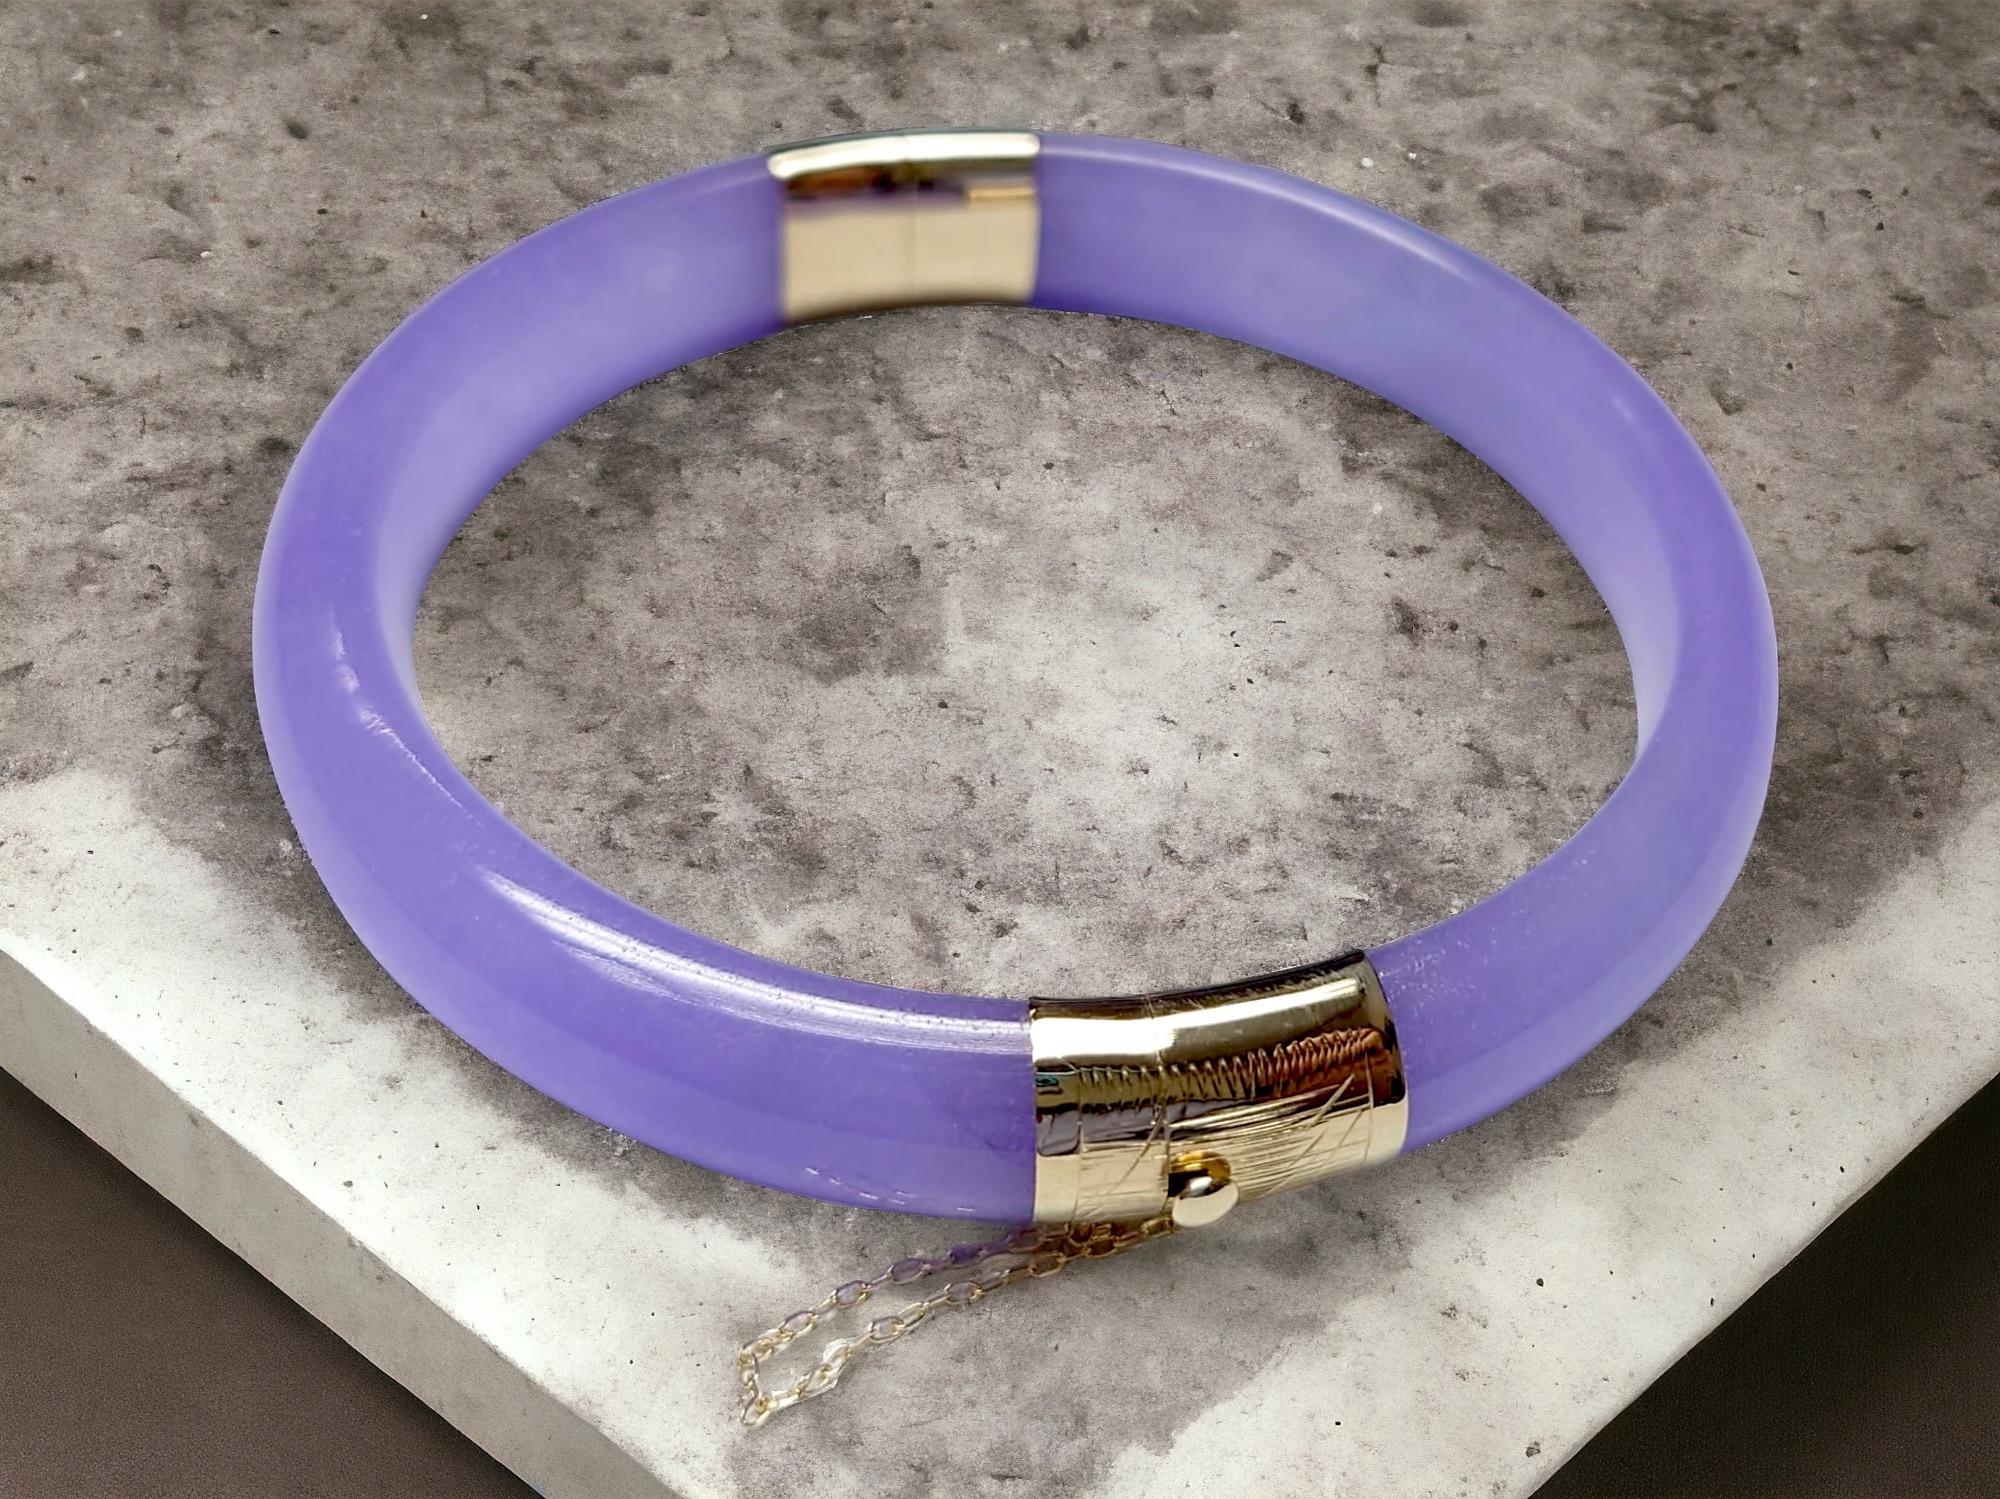 Viceroy's Circular Lavender Jade Bangle Bracelet (with 14K Yellow Gold) For Sale 9